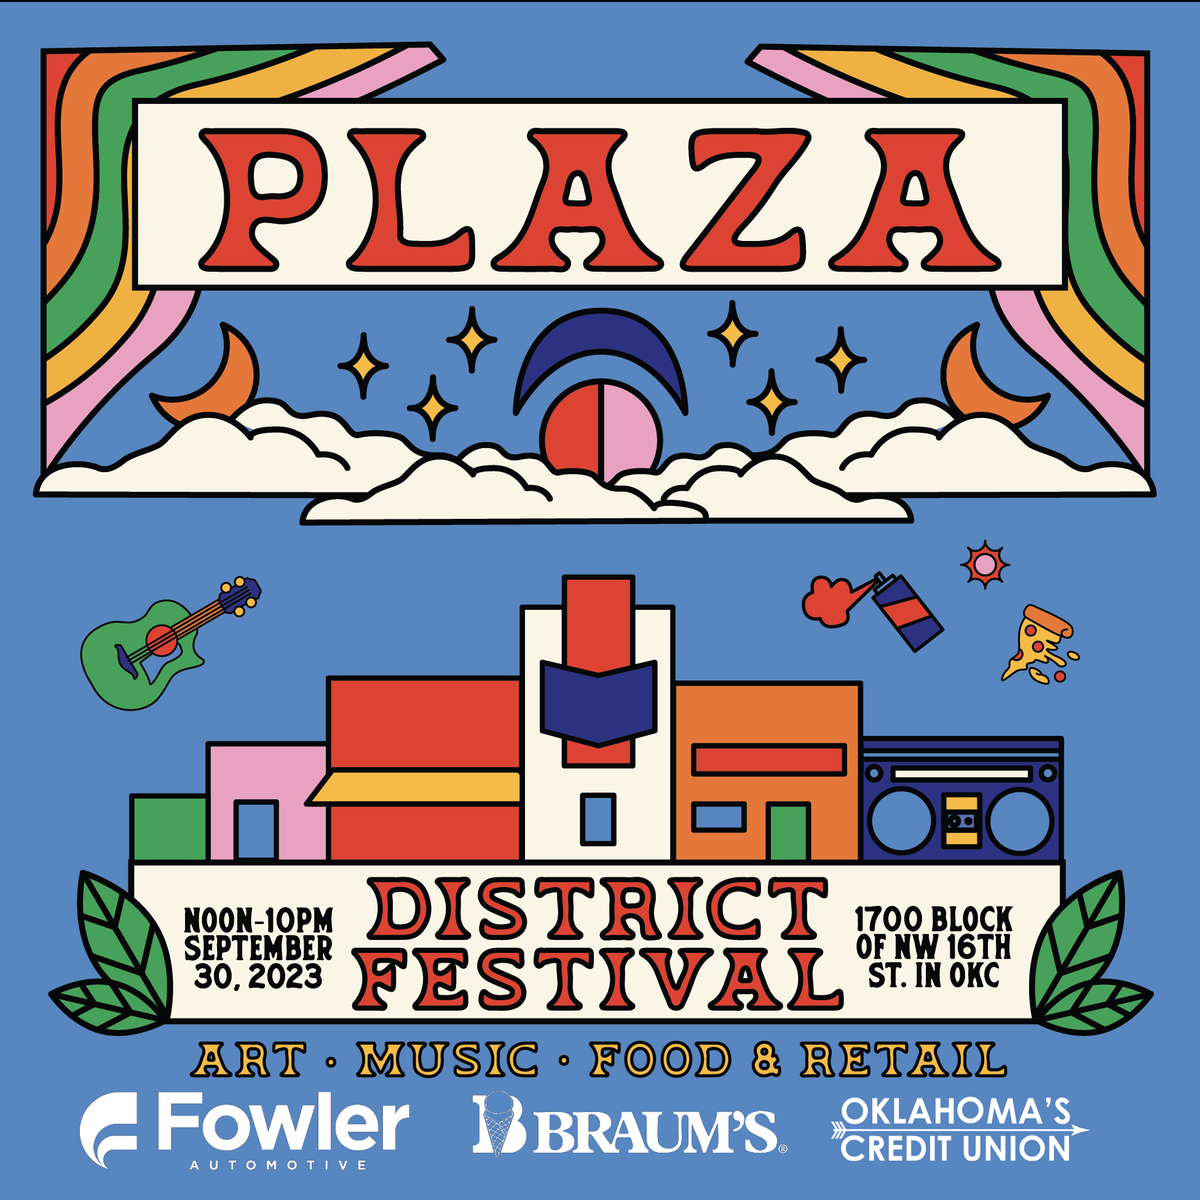 The 24th Annual @plazadistrict Festival is almost here! Join in at the 16th Street Plaza District for ART 🎨 MUSIC 🎸DANCE 🪩 FOOD 🍕 and more! 📢 Saturday, September 30th 📢 Visit Plazafest.org for more details on lineup, artists, and more!